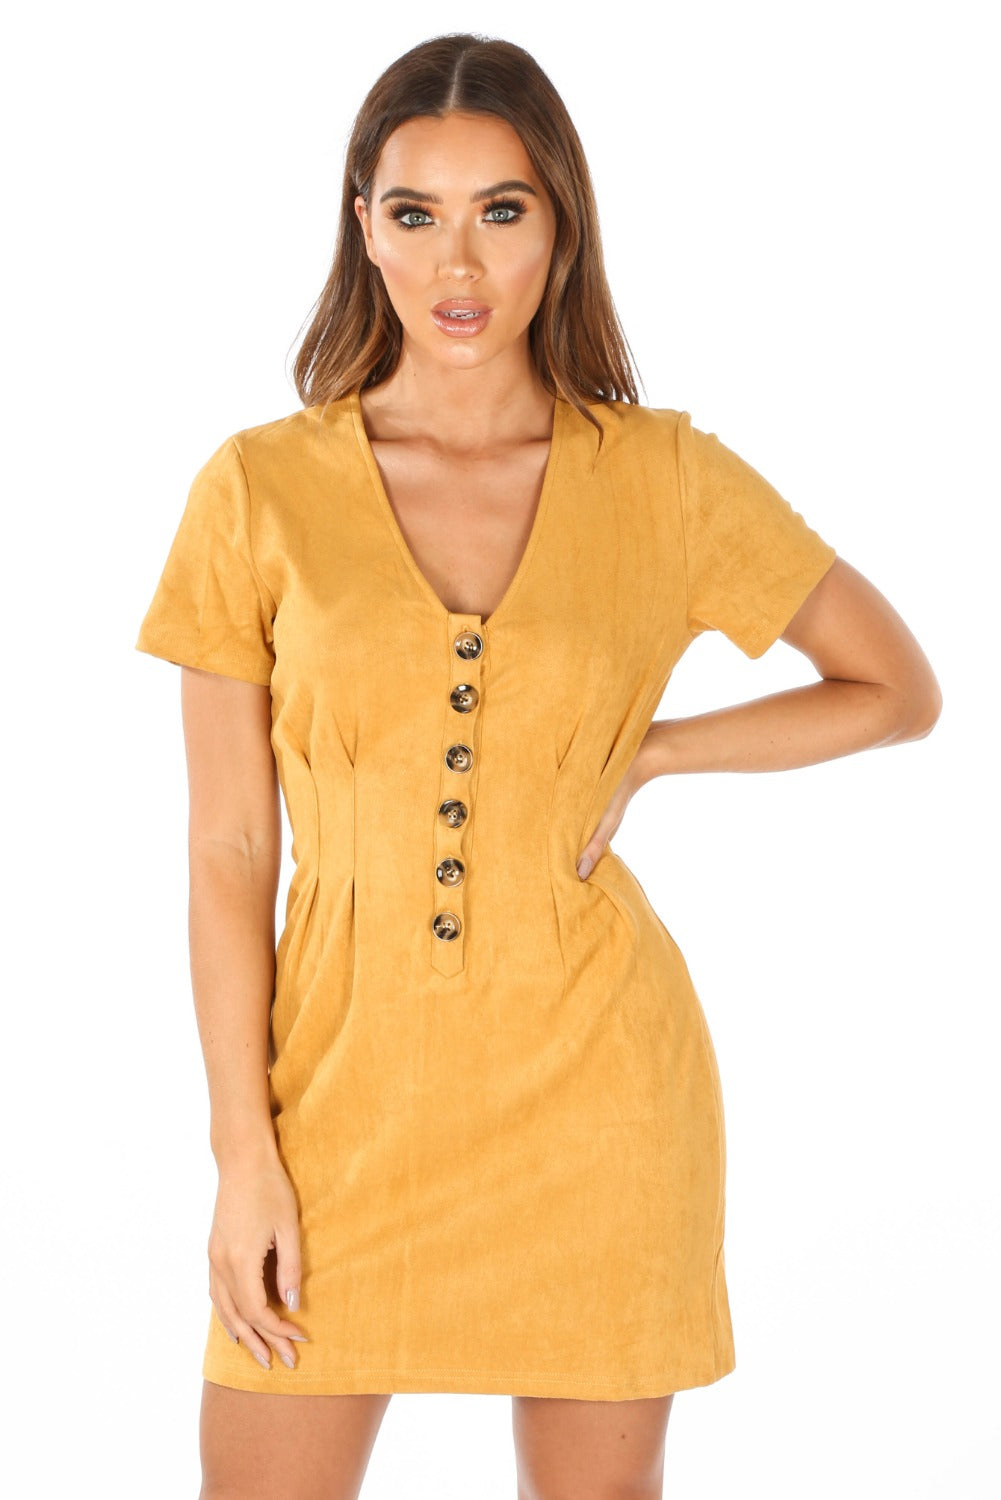 Mustard Faux Suede Mini Dress With Button Detail